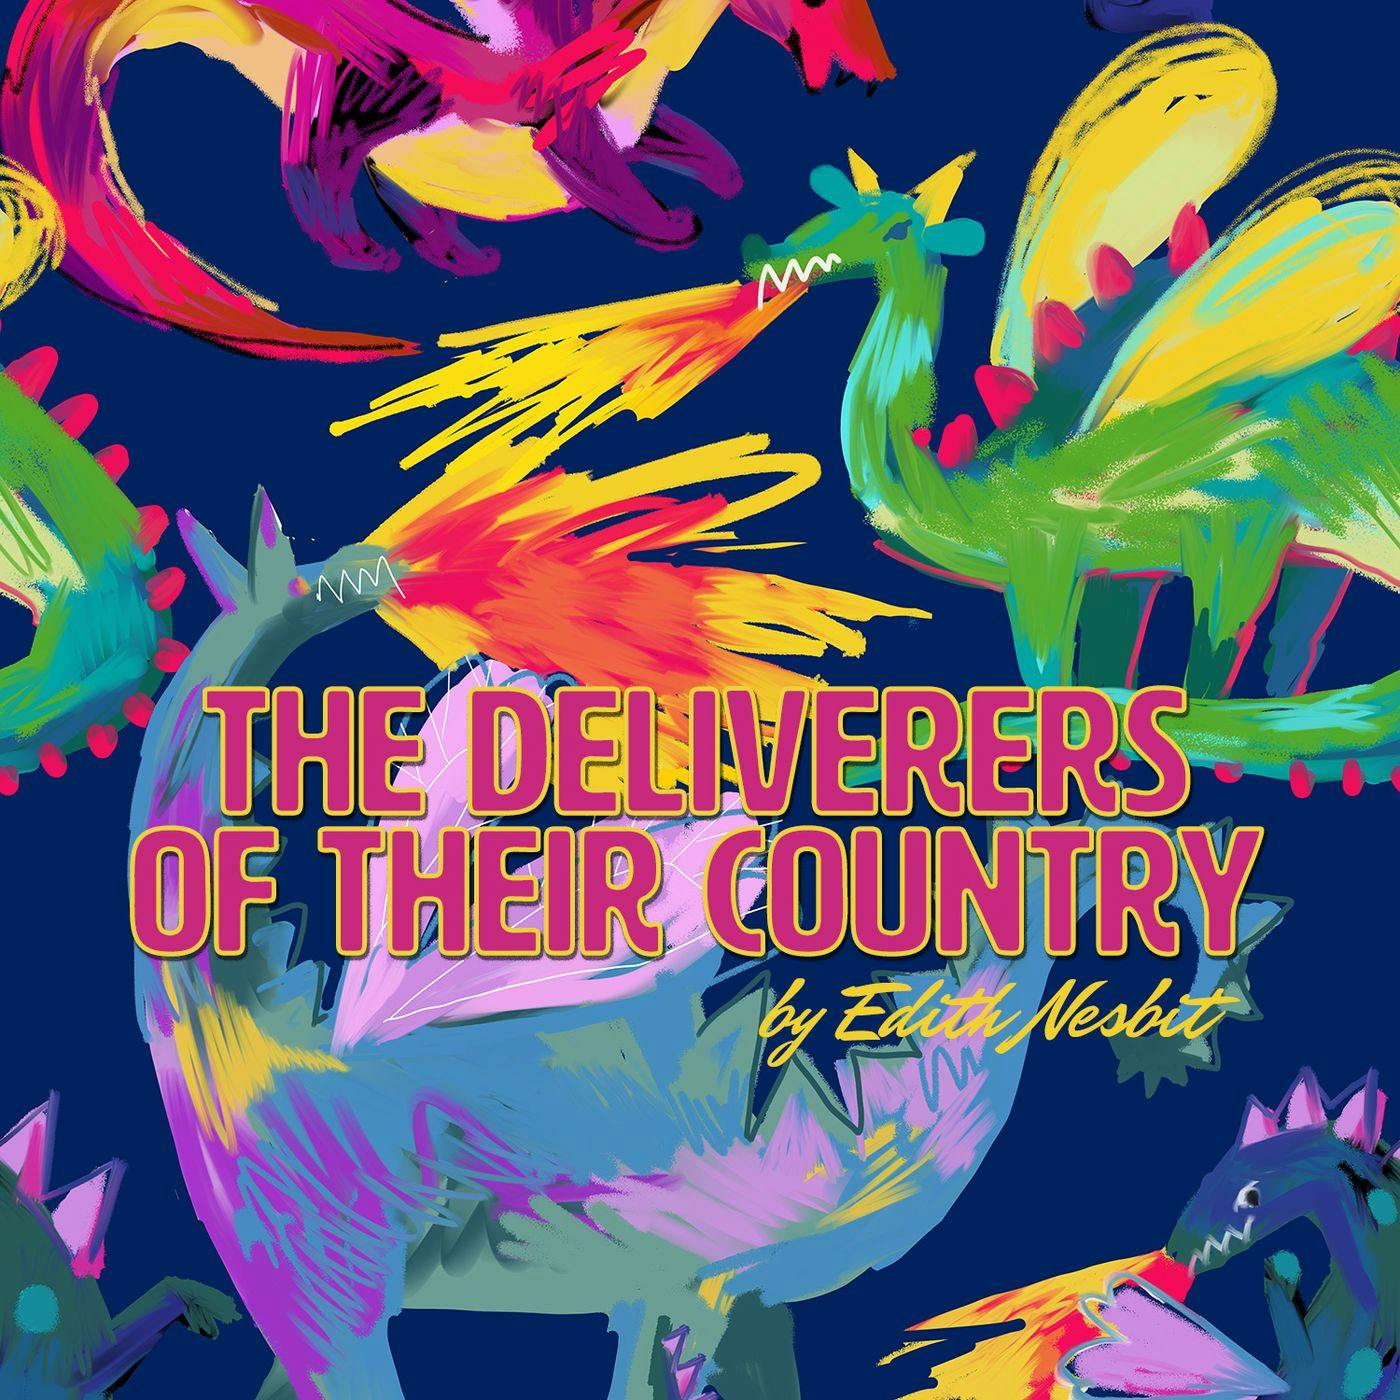 The Deliverers Of Their Country by Edith Nesbit